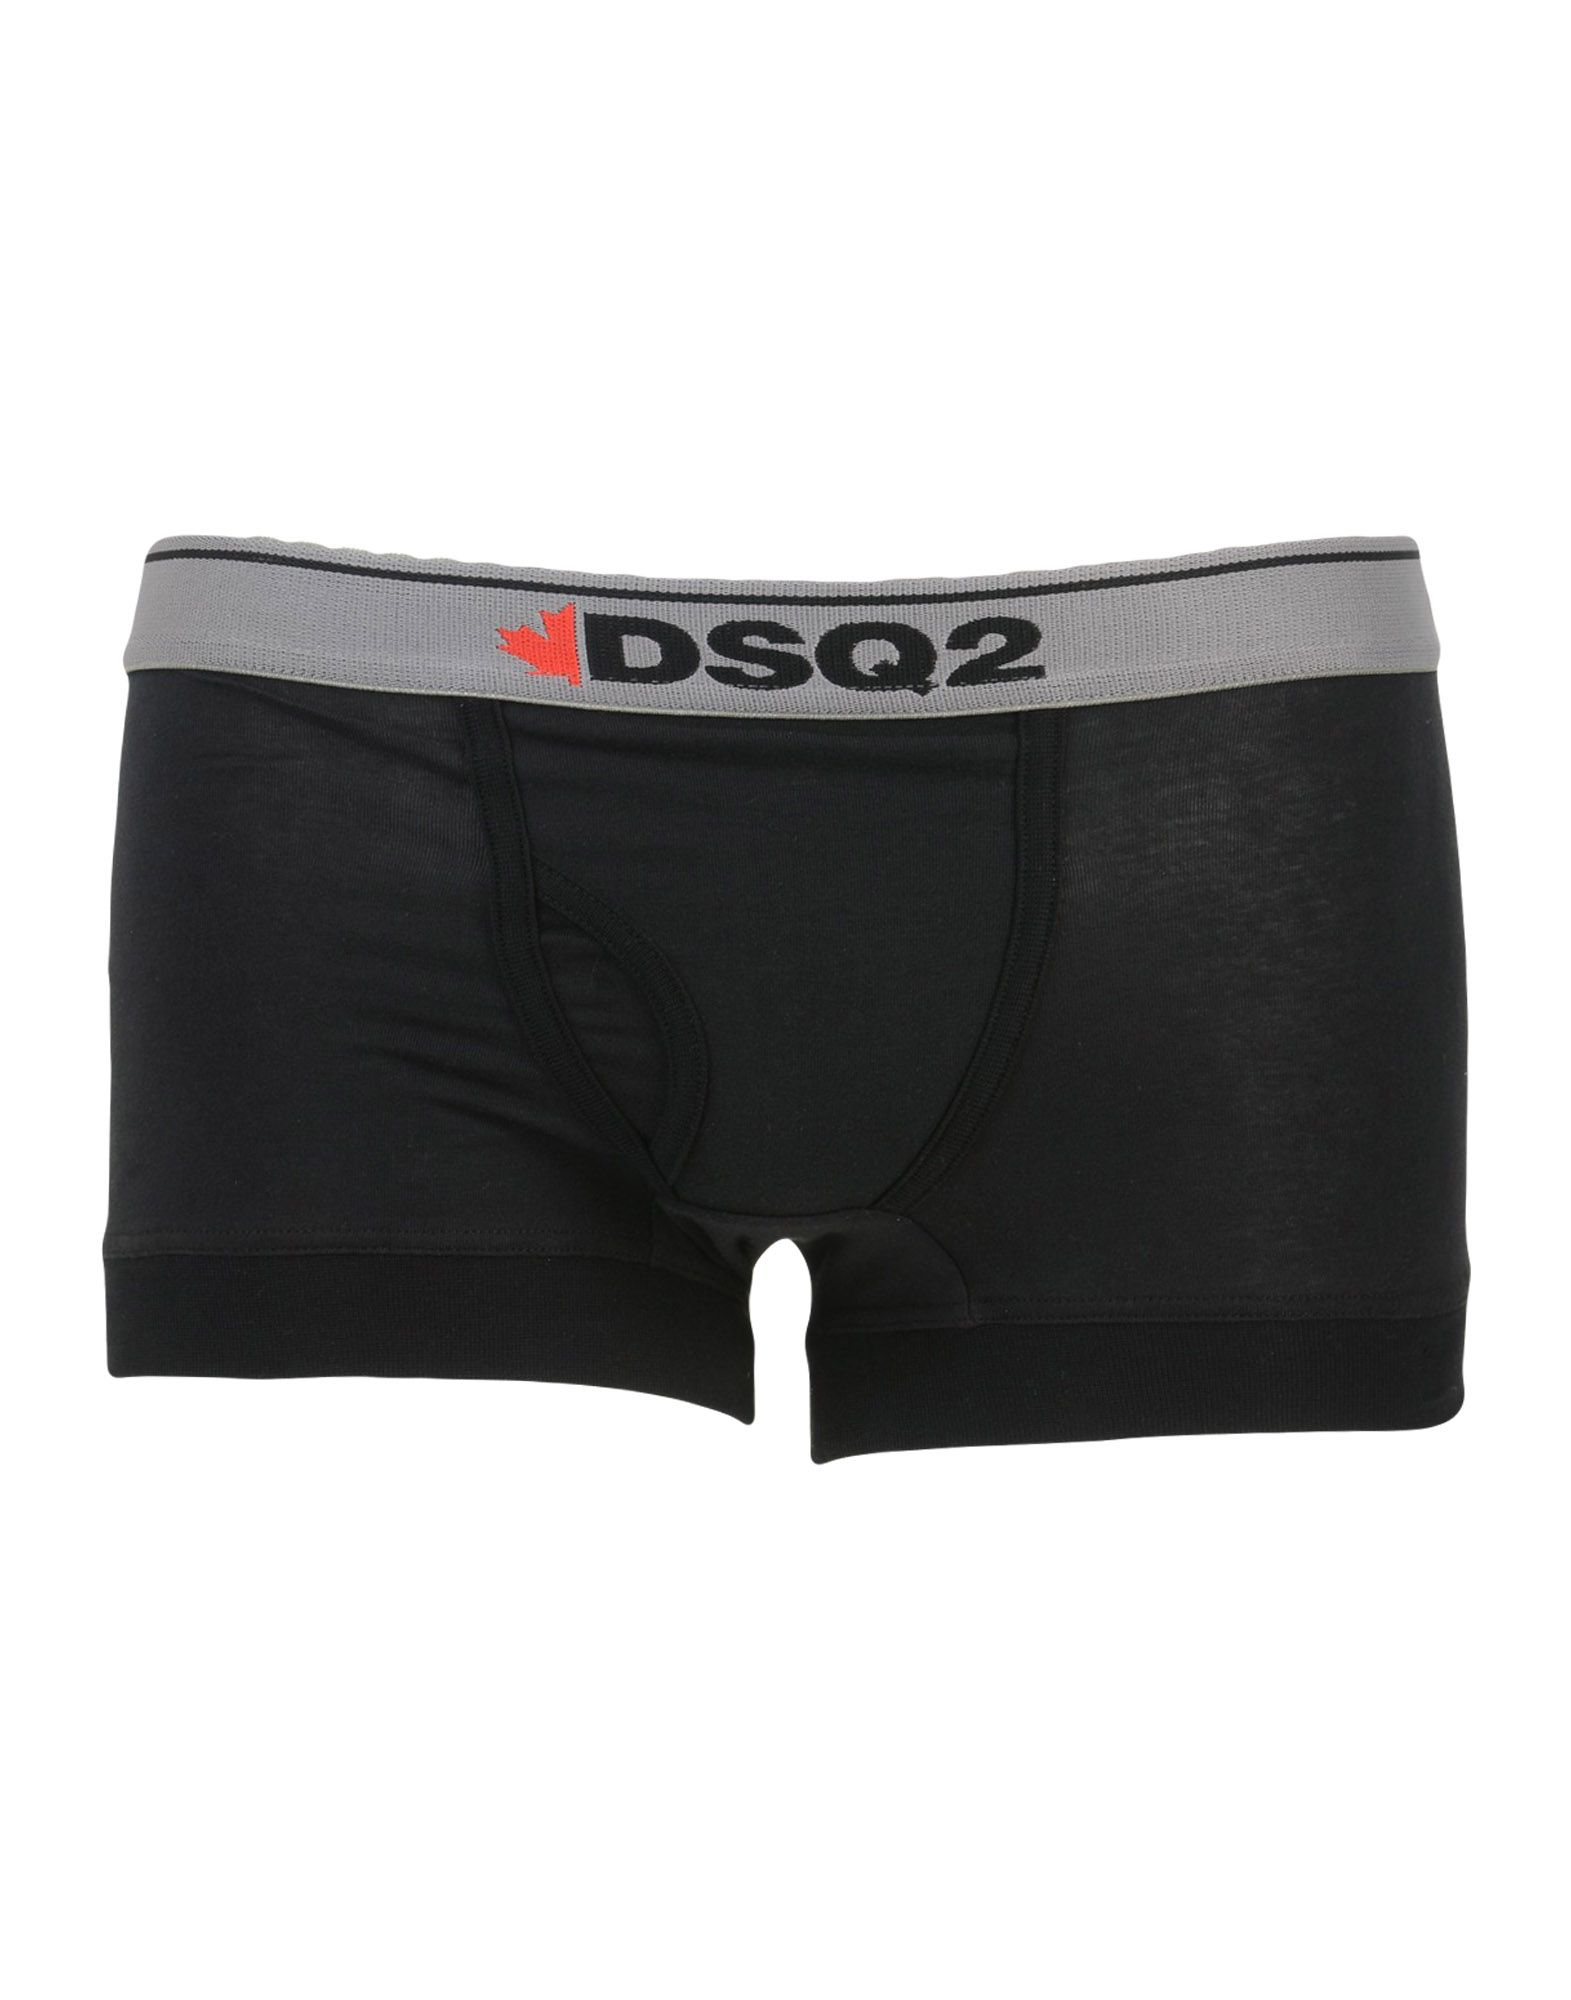 DSQUARED2 BOXERS,48202143KB 5